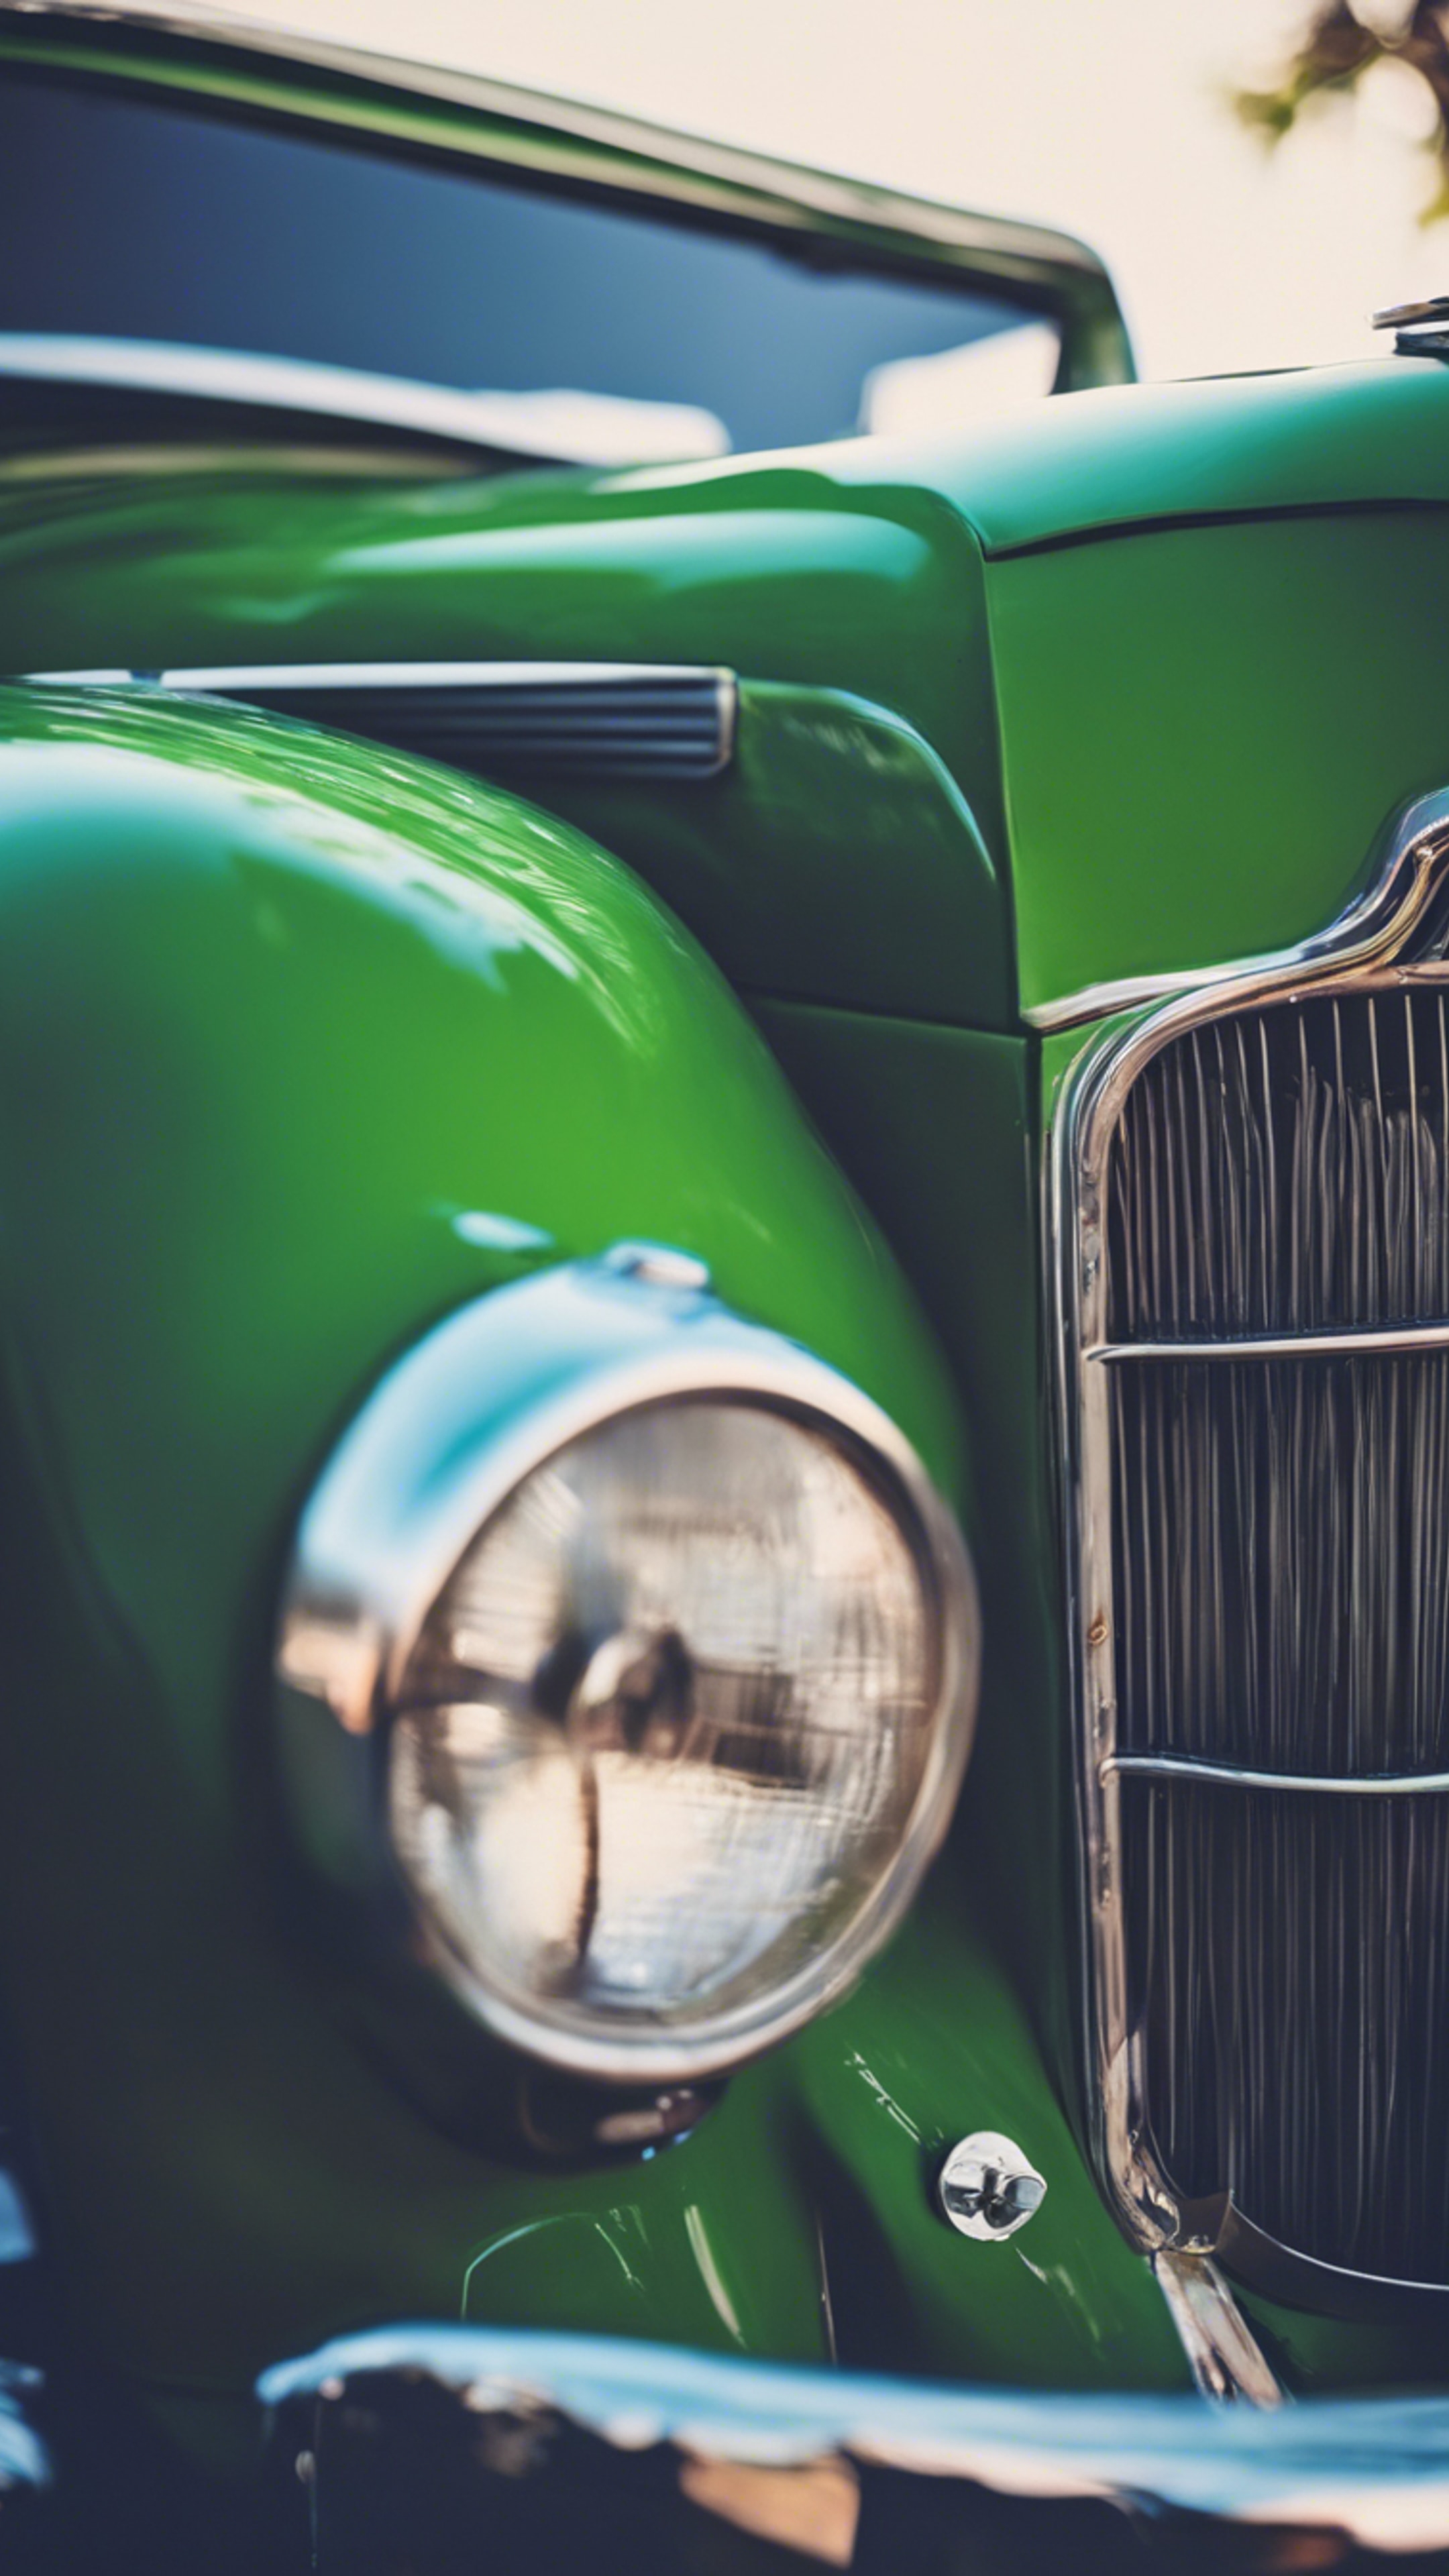 An old vintage car painted in a unique combination of navy blue and neon green. Ფონი[febf49cbb4064c31beae]